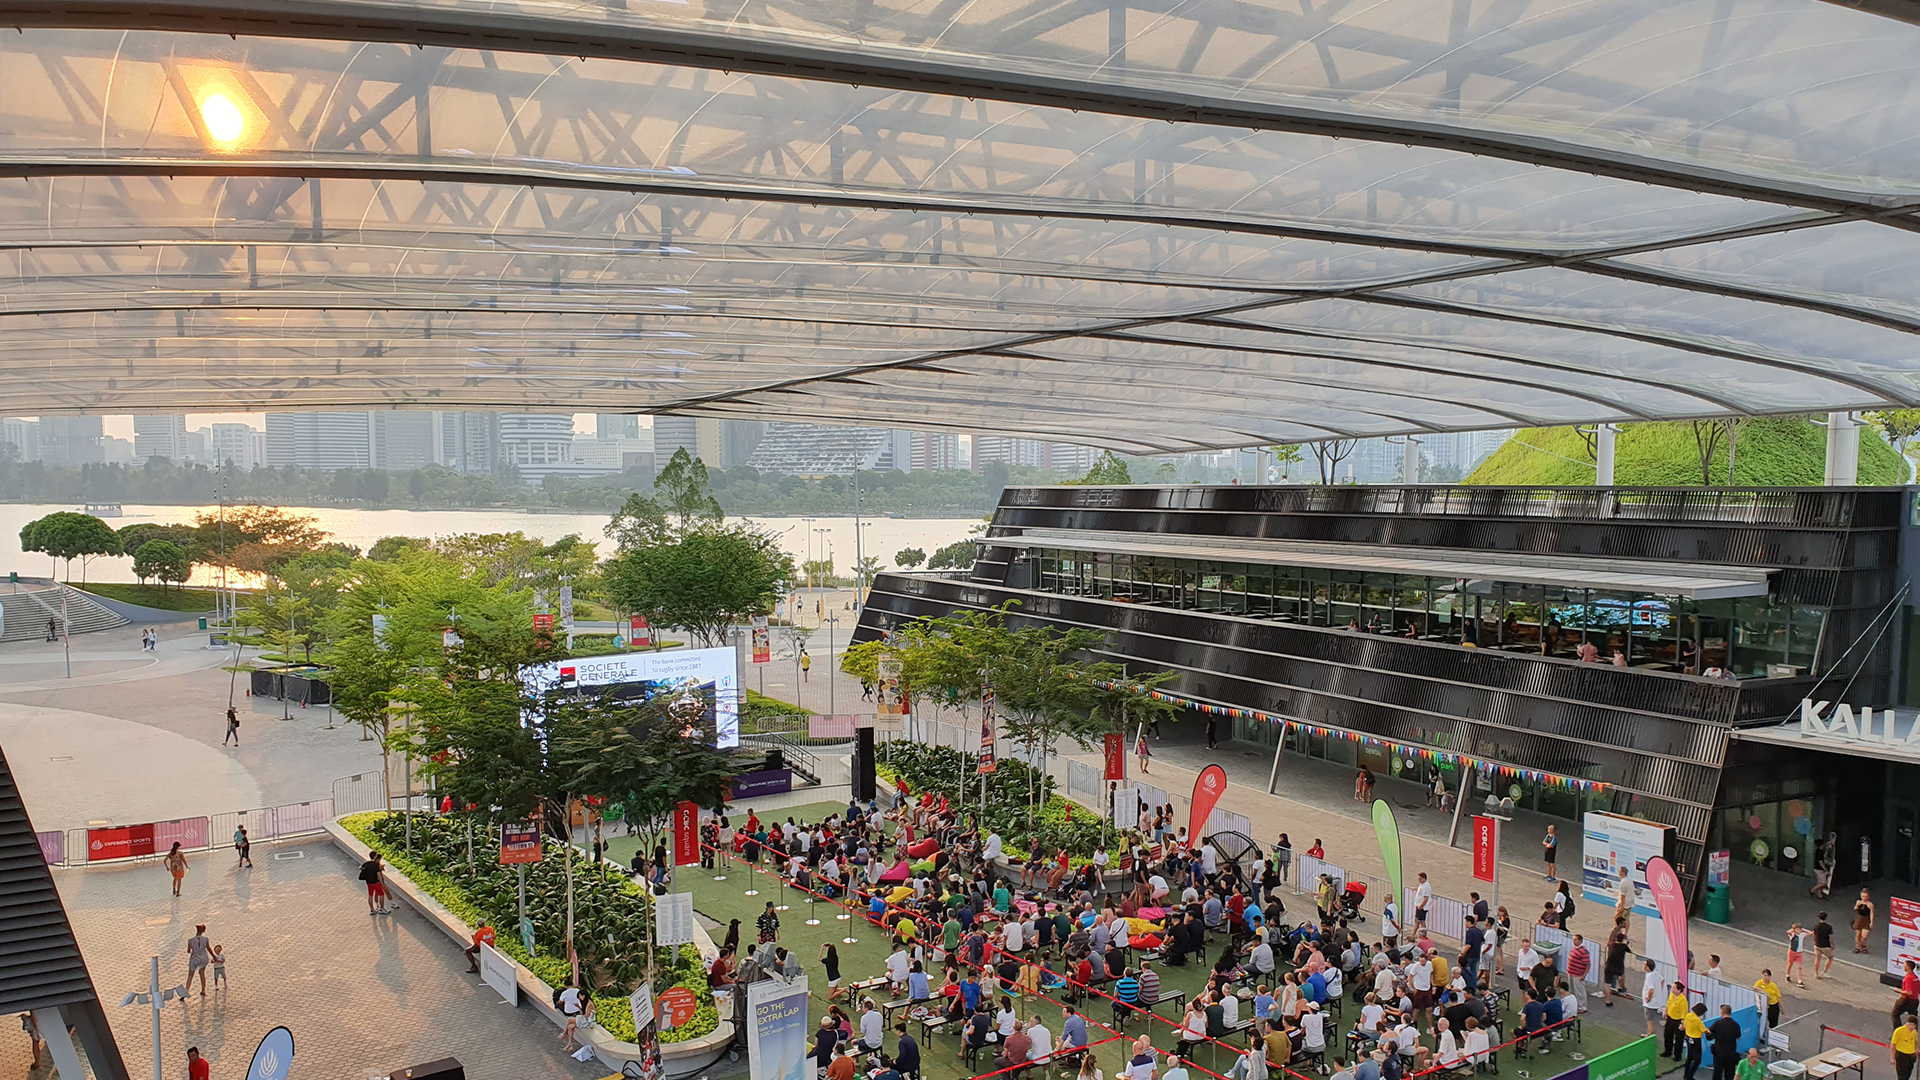 Events of all nature makes use of the West Plaza with a 4,000 m² Texlon® ETFE canopy to enhance visitor experience.